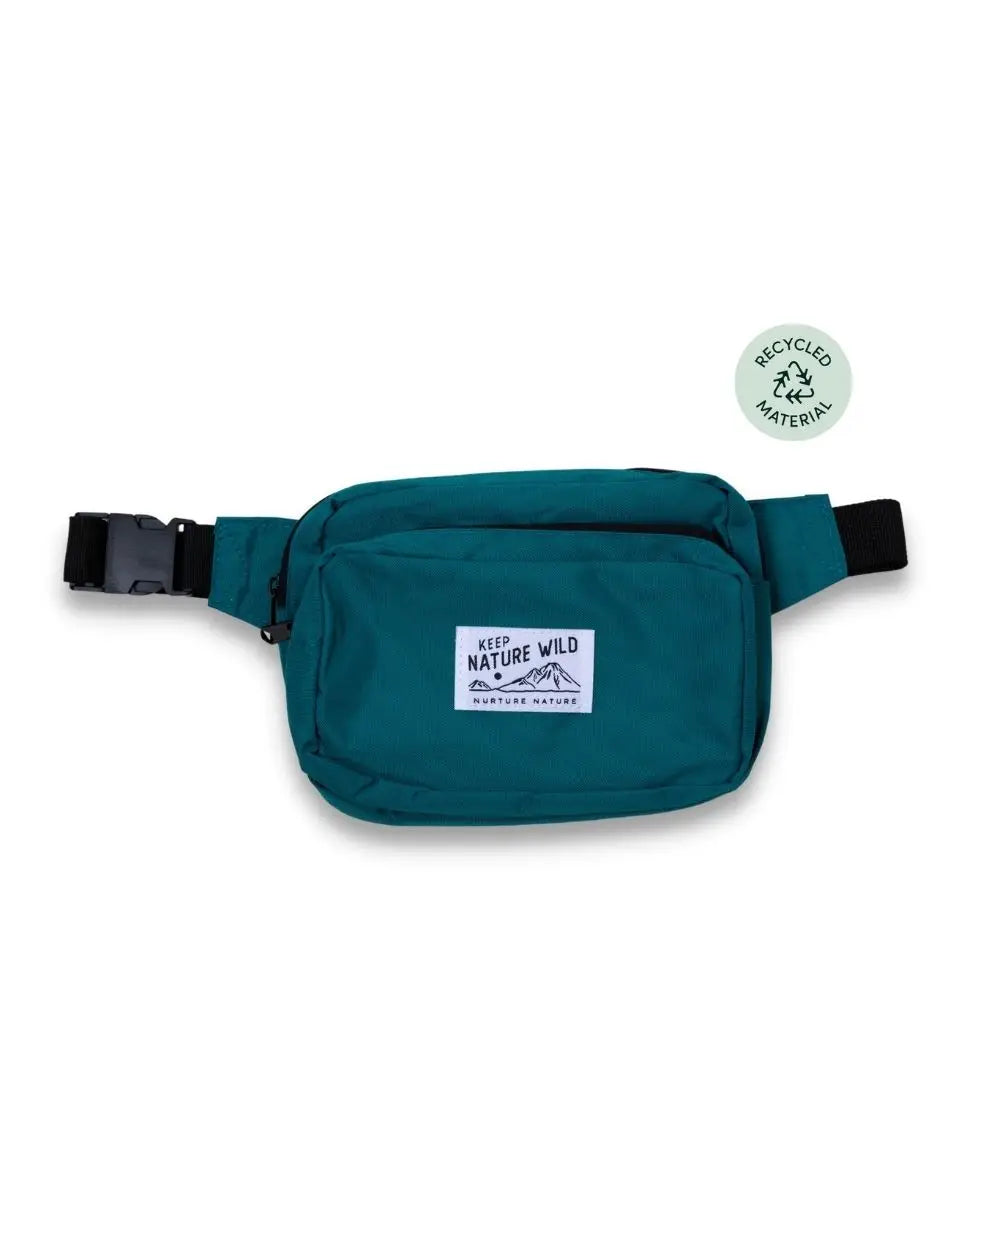 Keep Nature Wild Fanny Pack - Teal